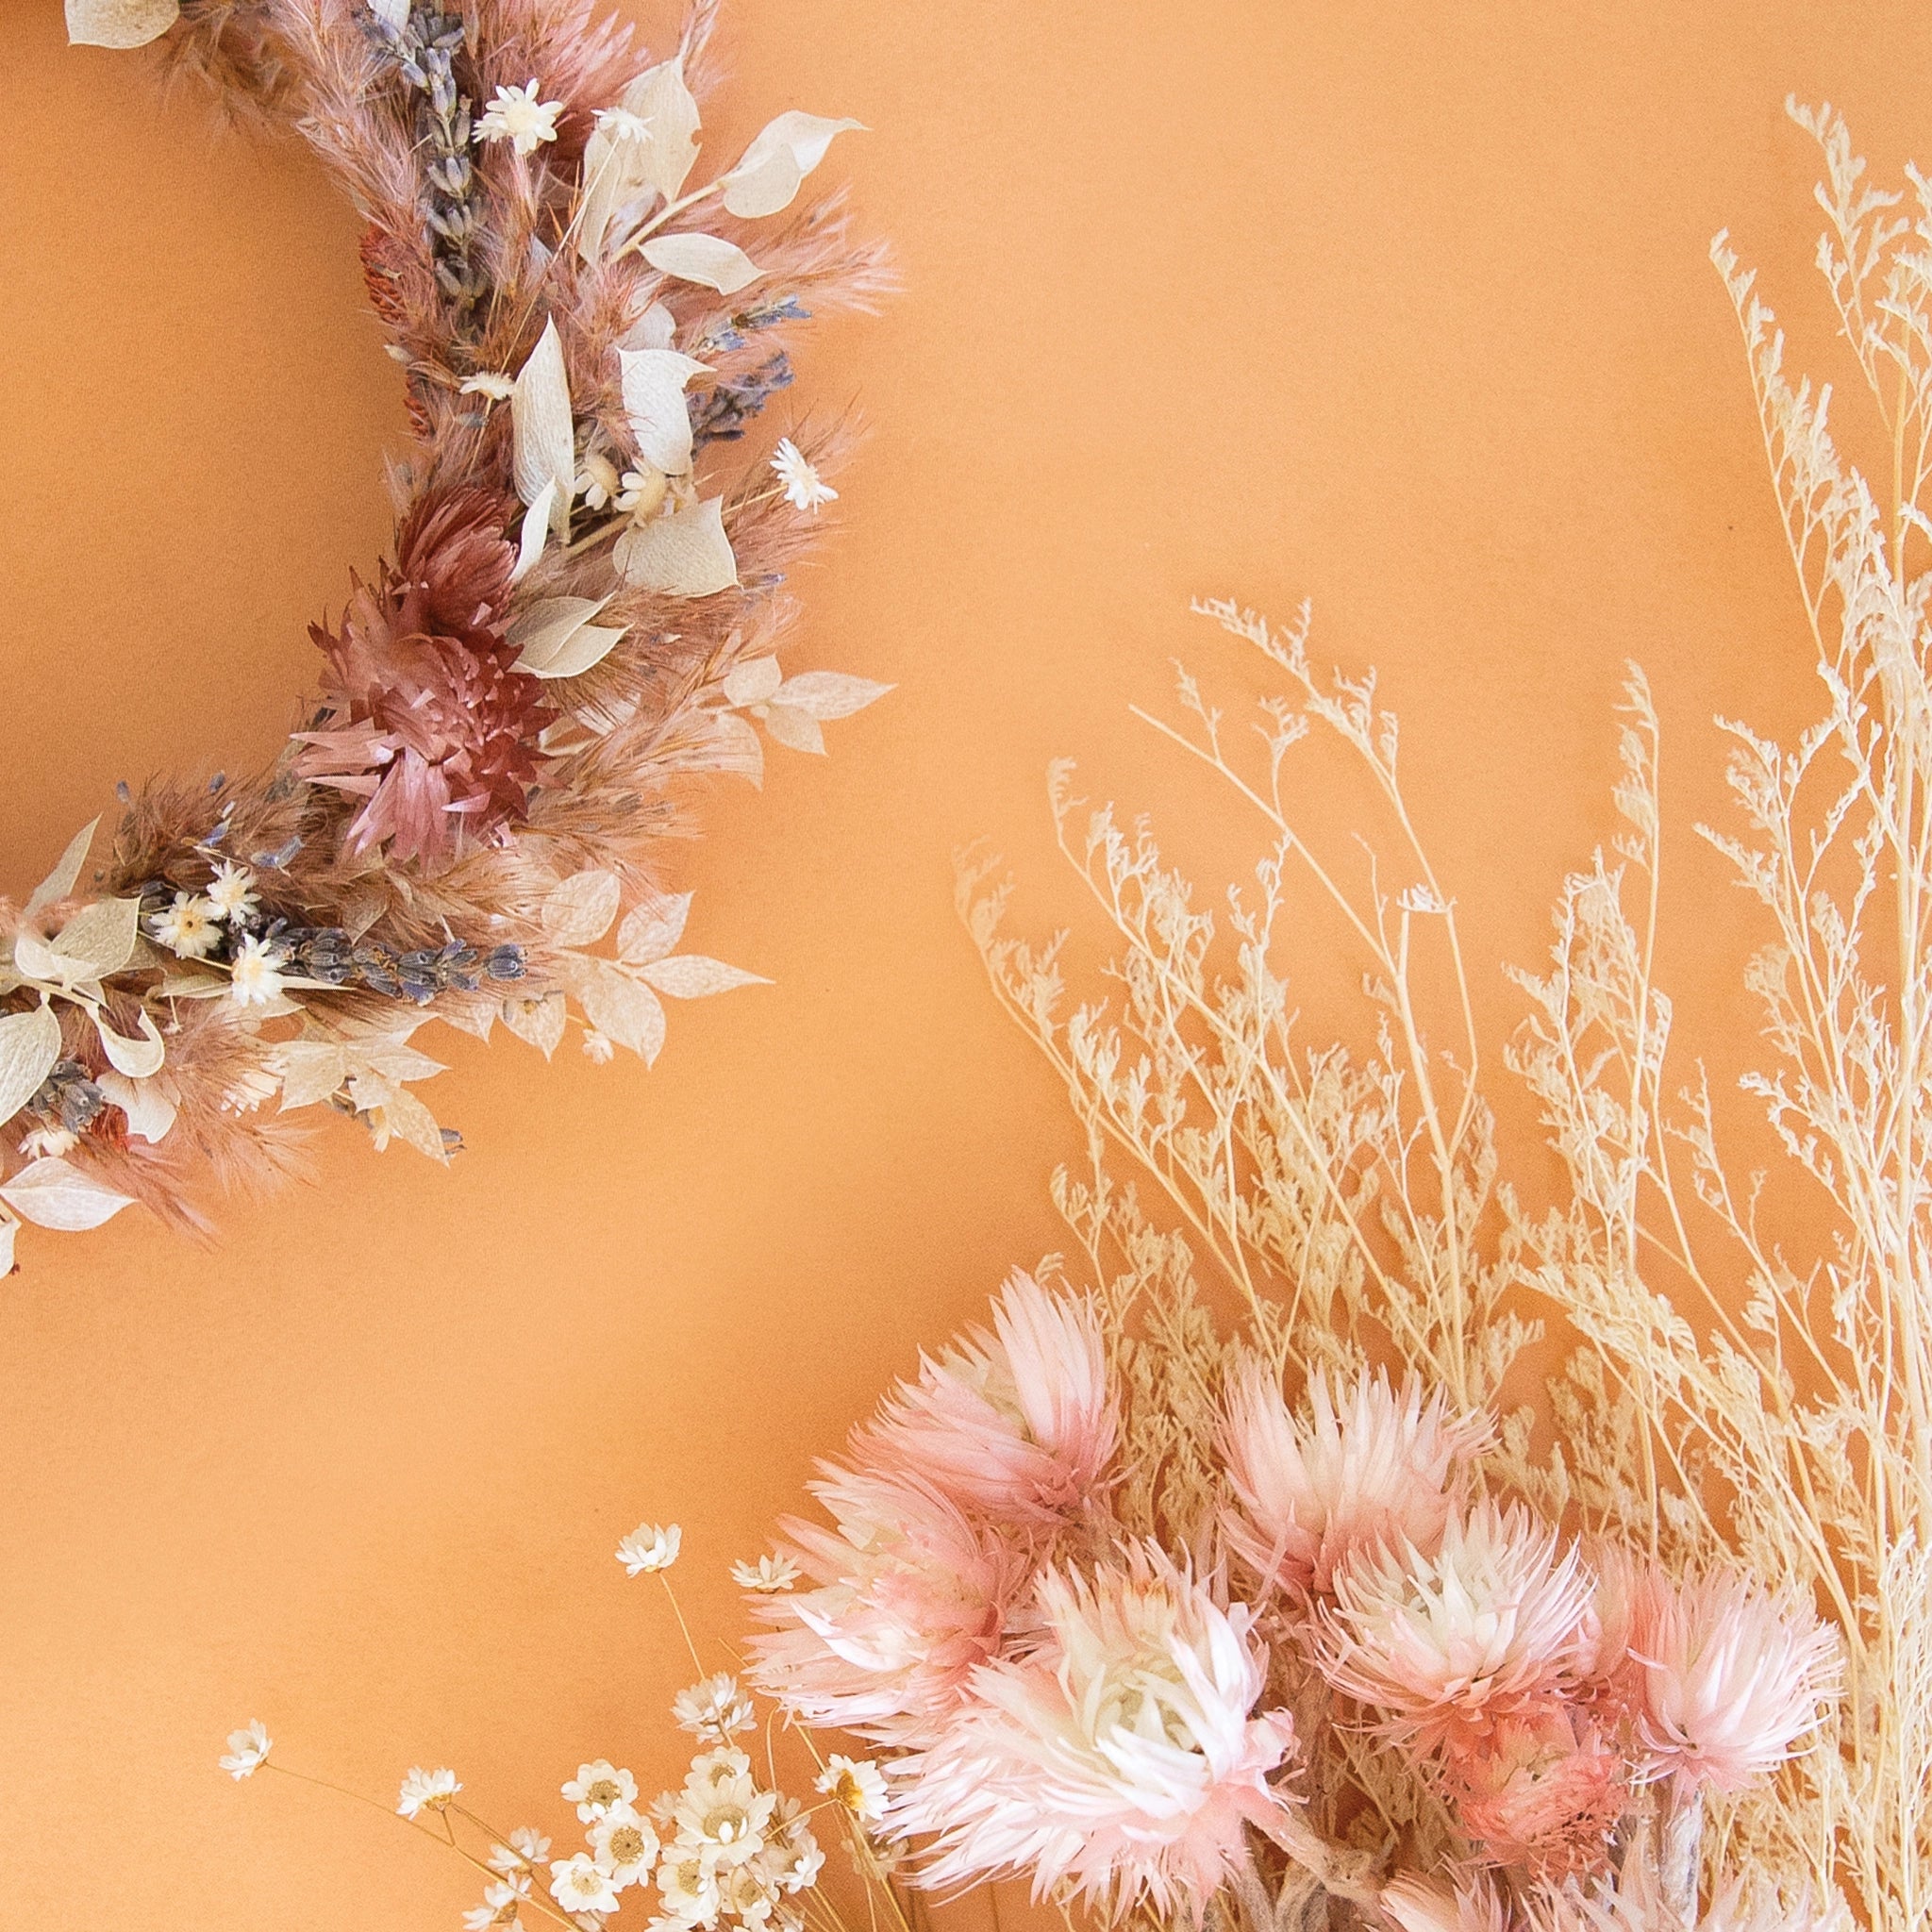 On an orange background is dried florals alongside a flower crown of florals. 